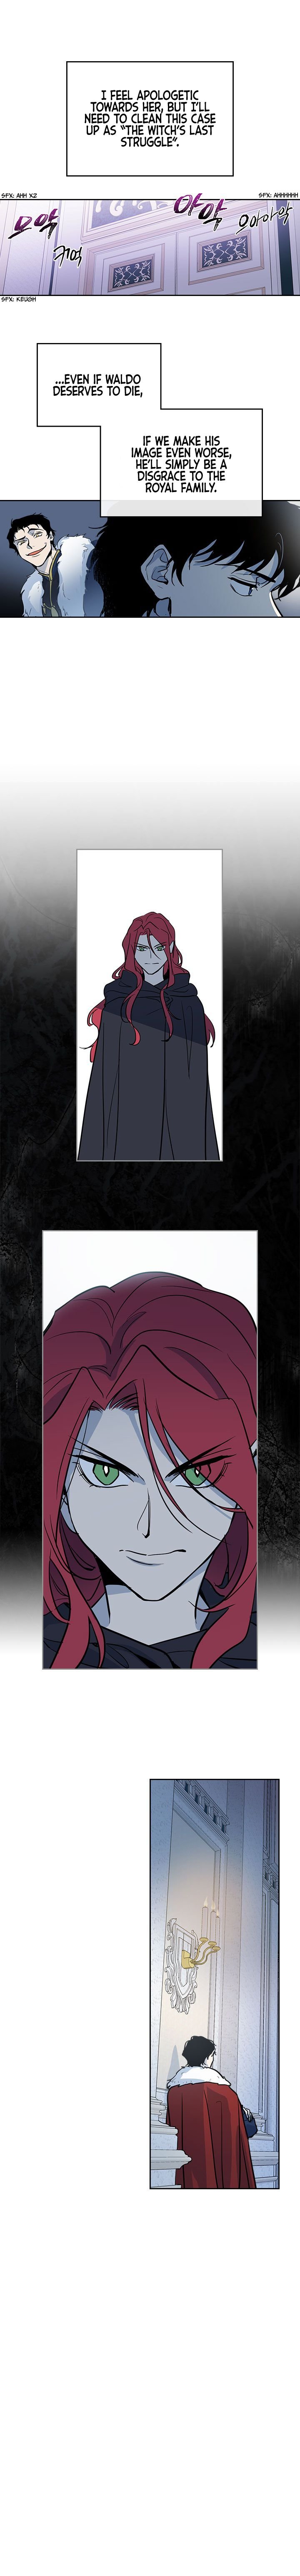 The Lady and the Beast Chapter 2 - Page 7